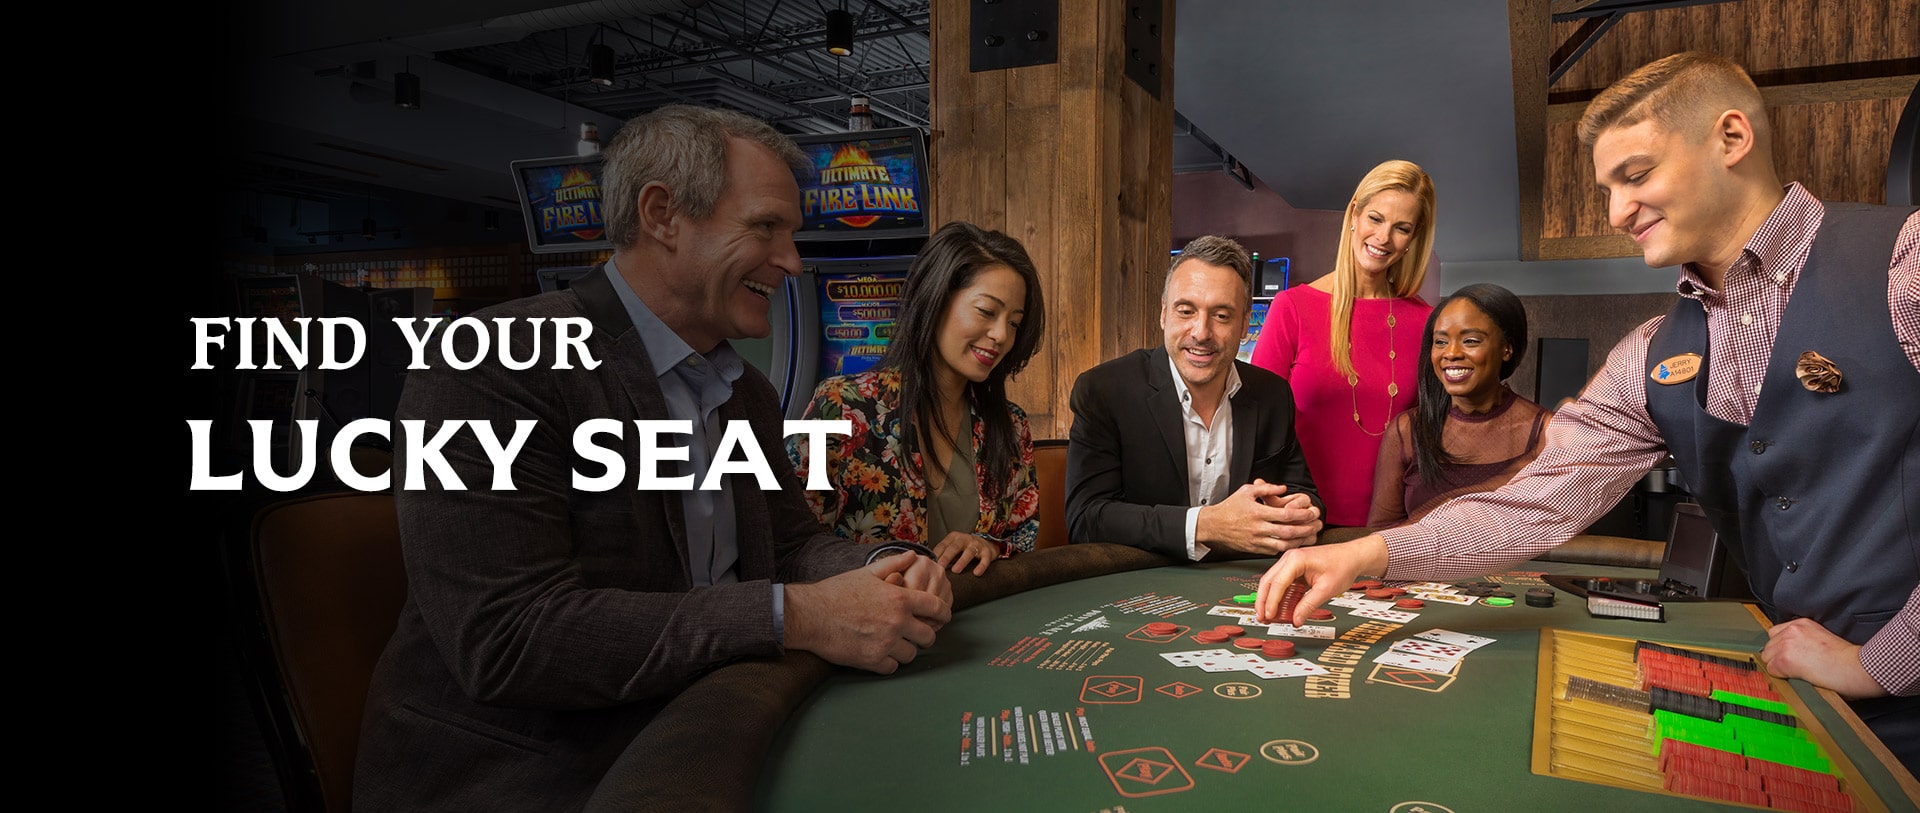 Find Your Lucky Seat - an ongoing table game at point place casino